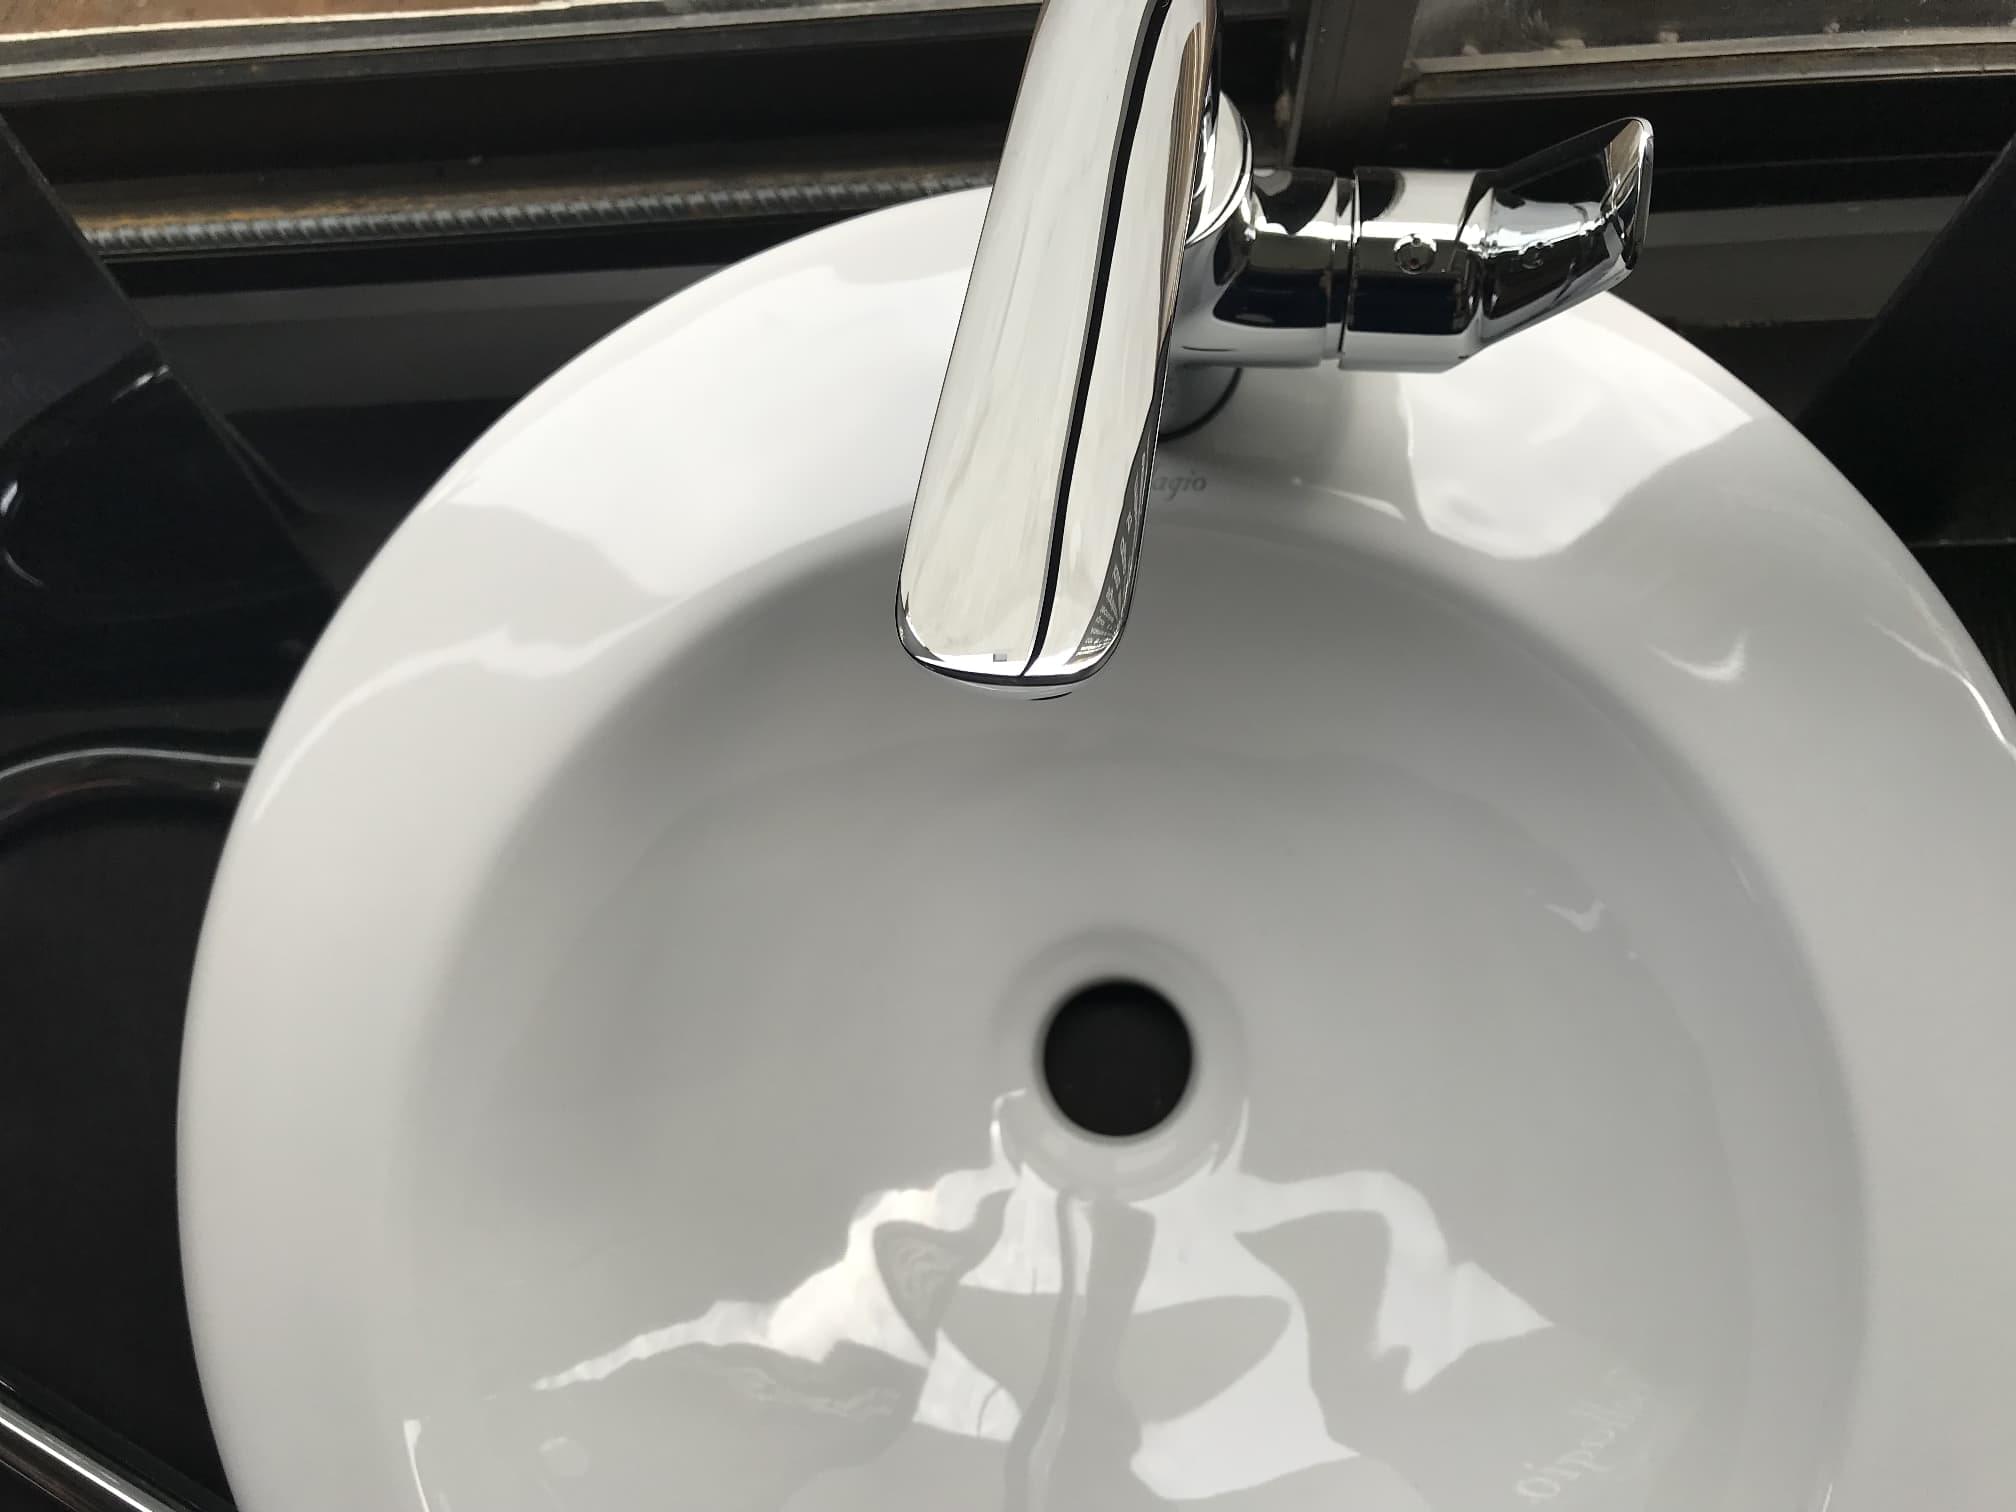 Pearl colored sink professionally cleaned.